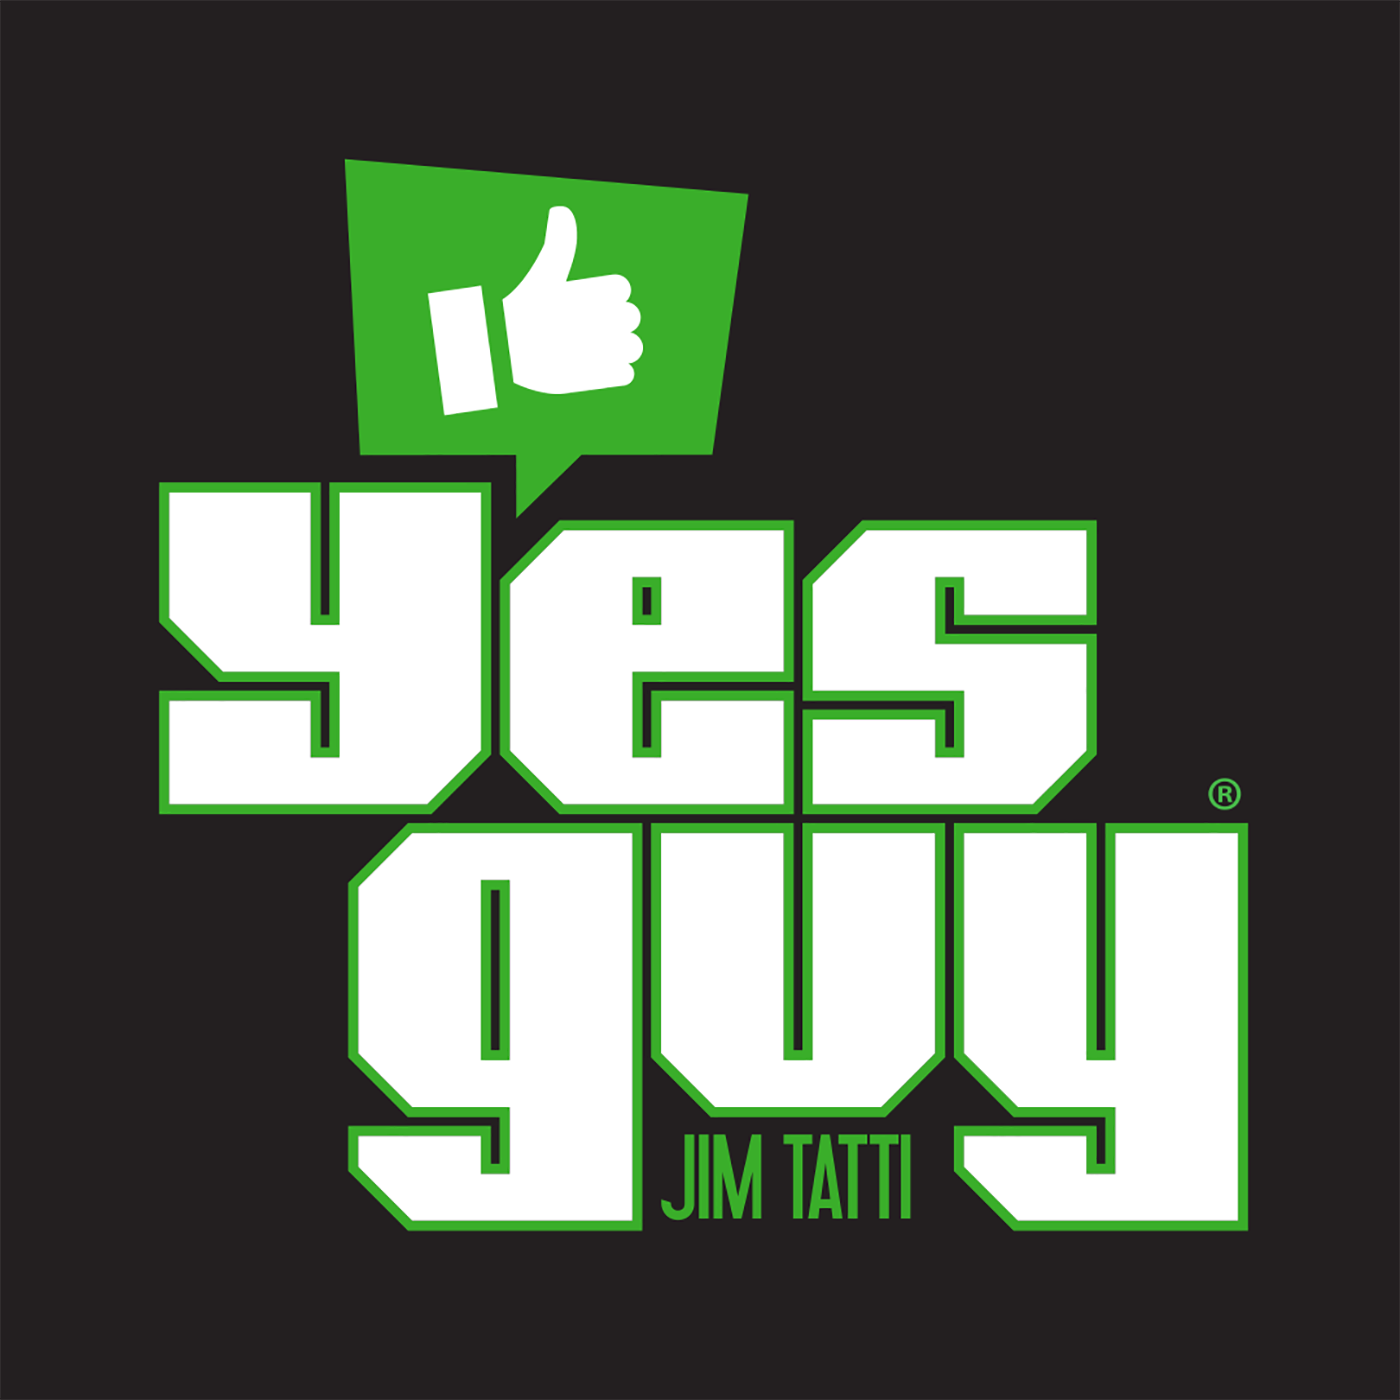 Yes Guy - March 14 - Episode 187